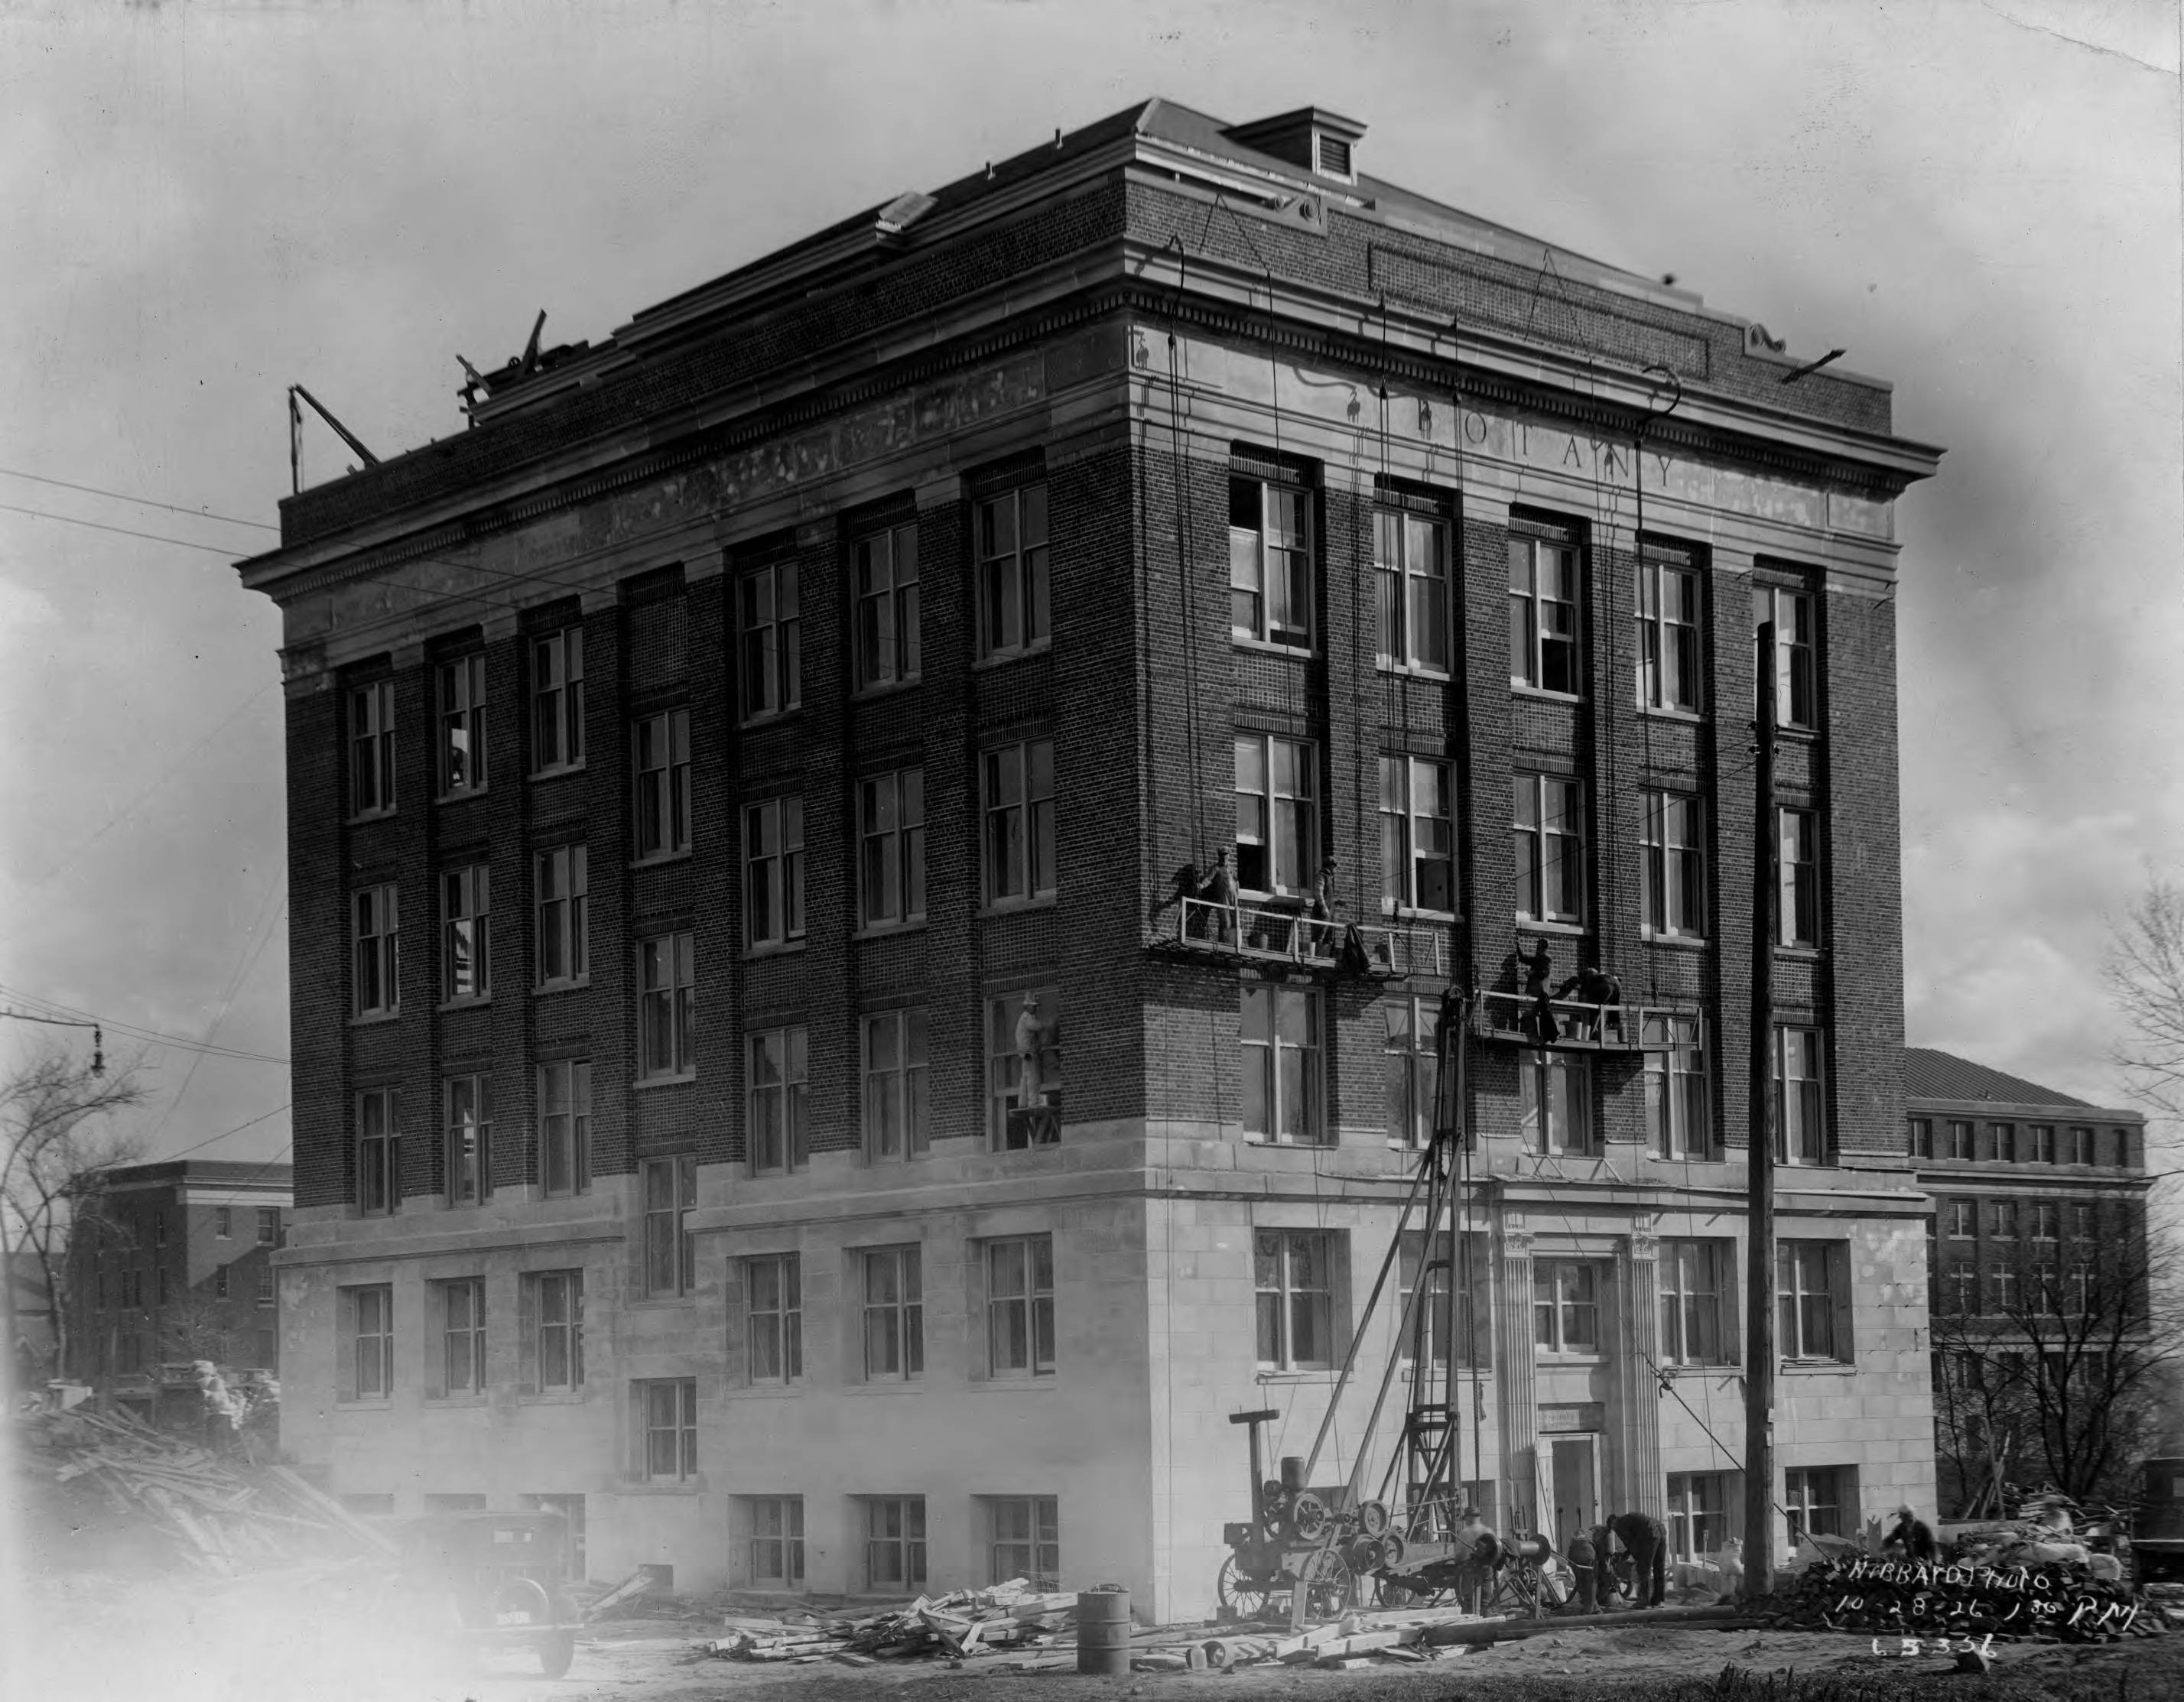 Black and white photograph of the university's Botany building under construction in 1926.